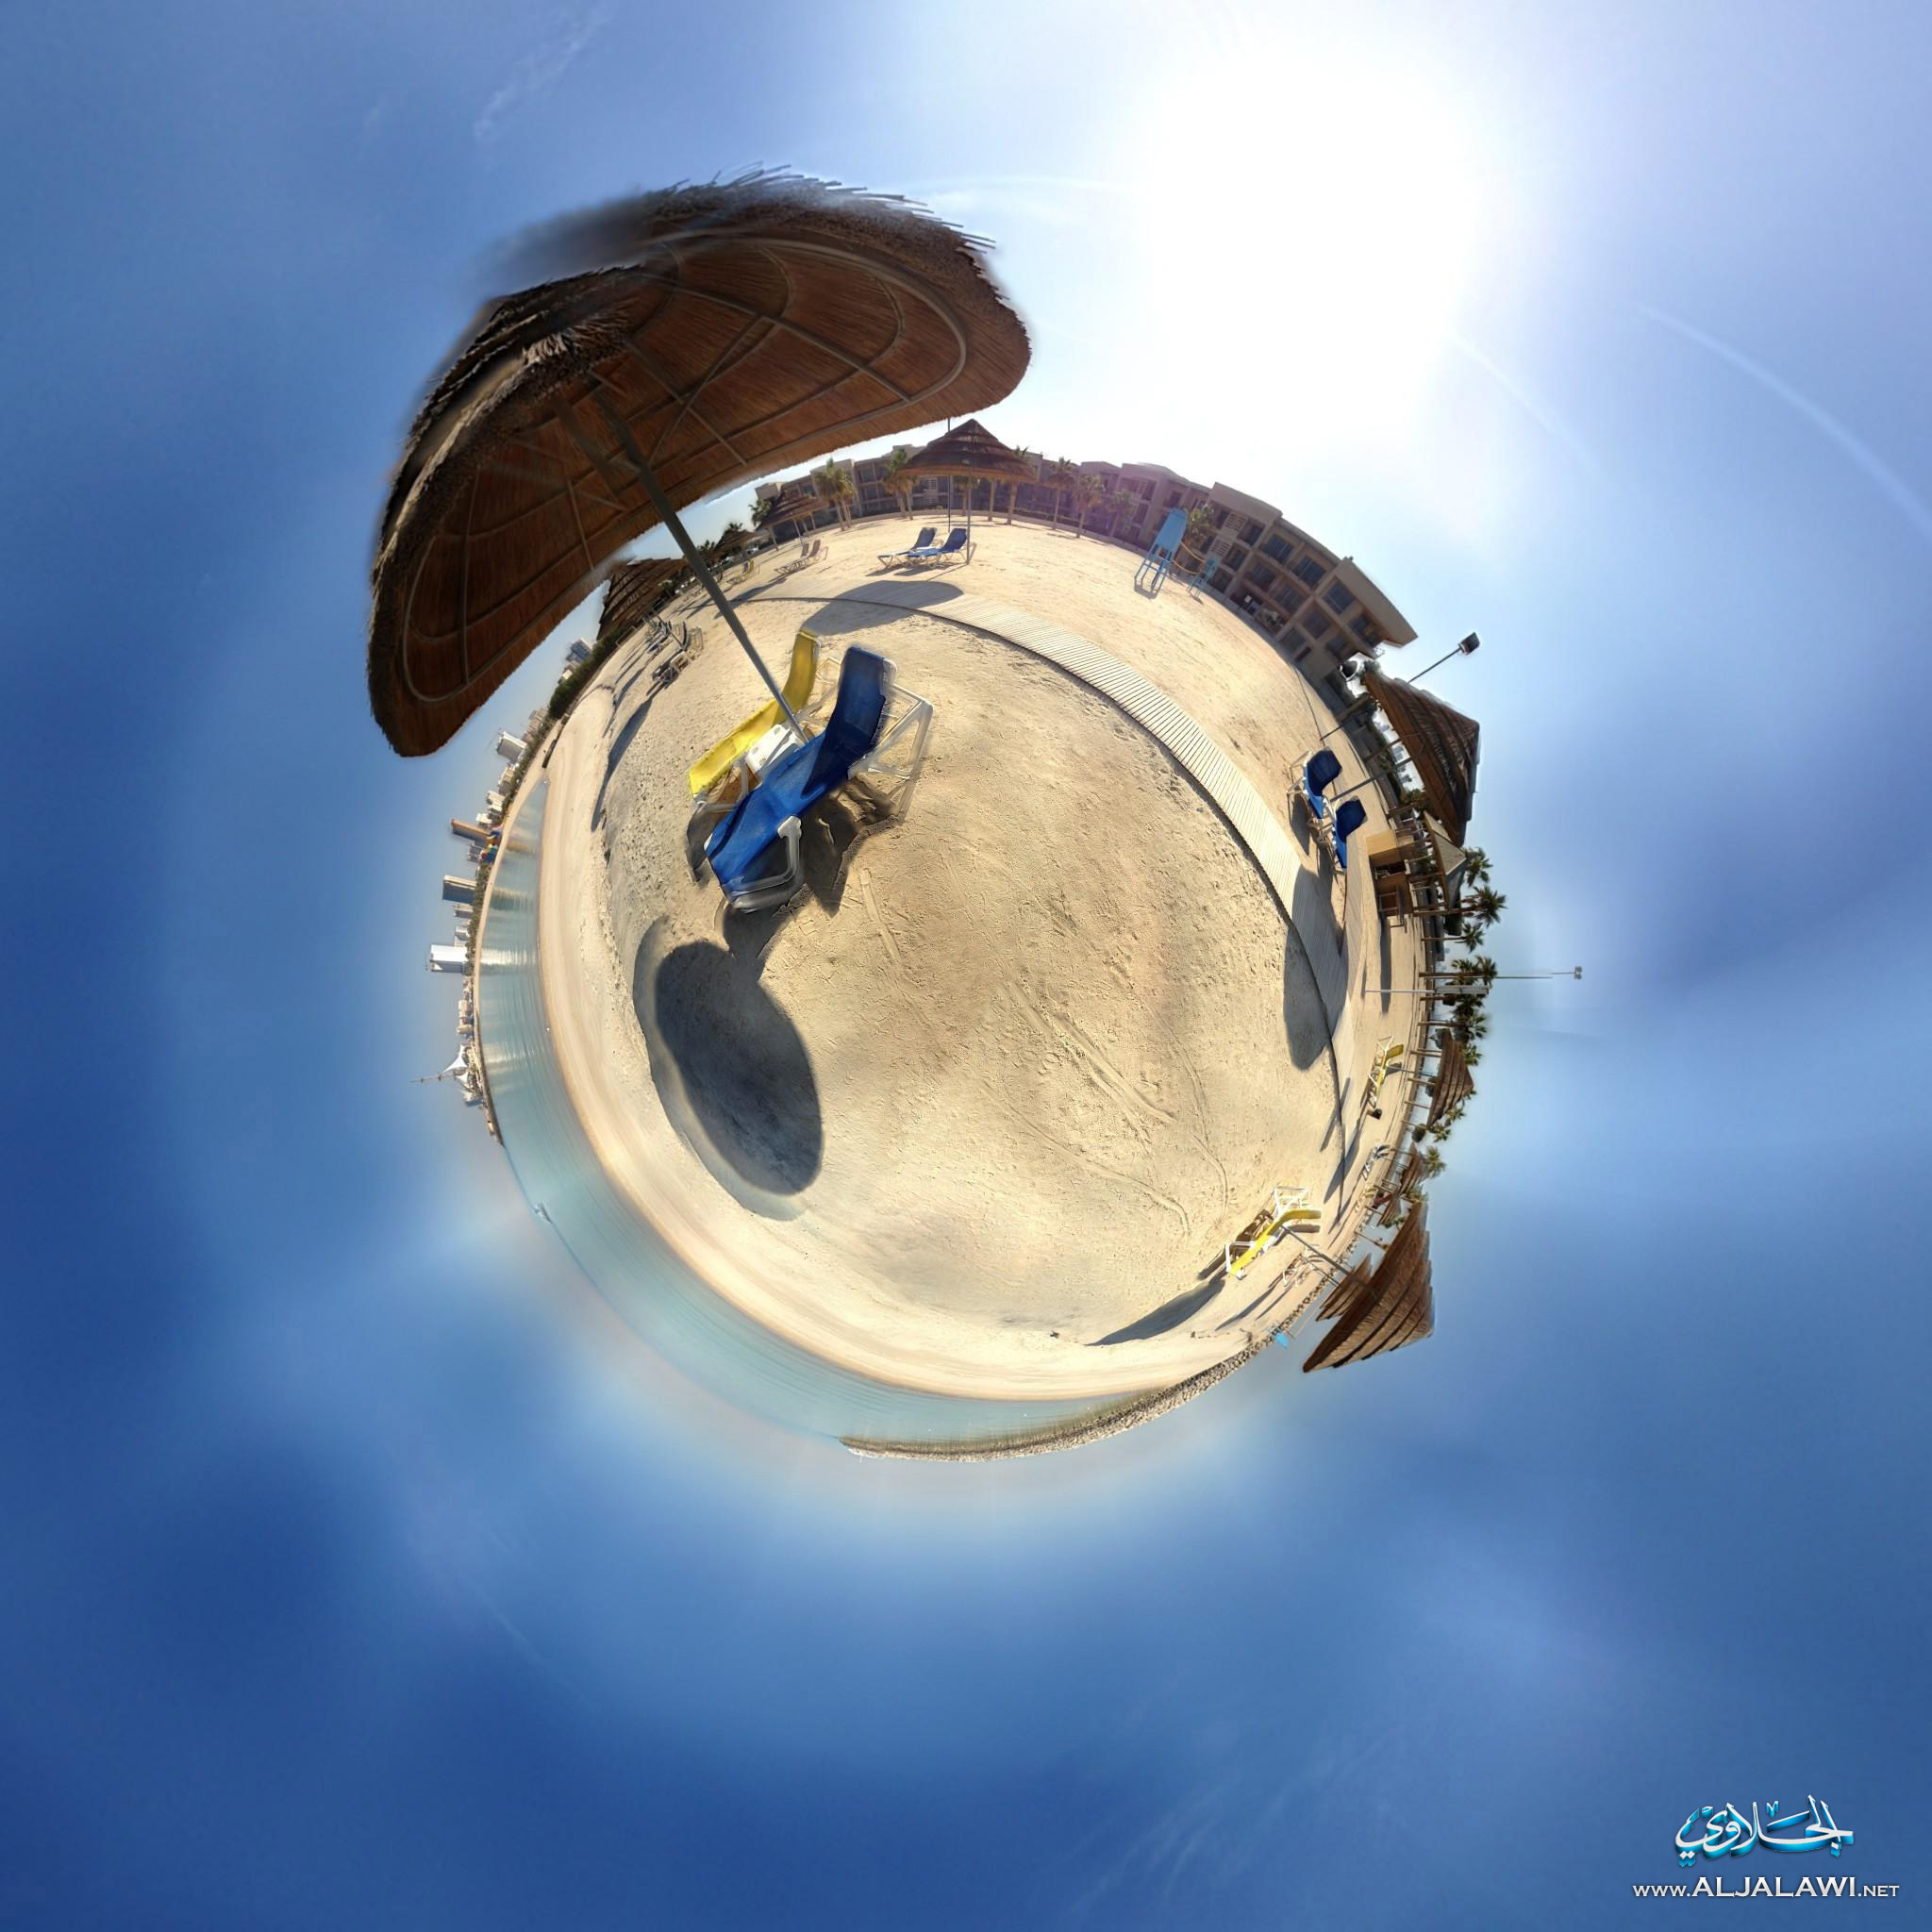 http://www.aljalawi.net/wp-content/uploads/2012/01/adf8Ss_stereographic-copy.jpg